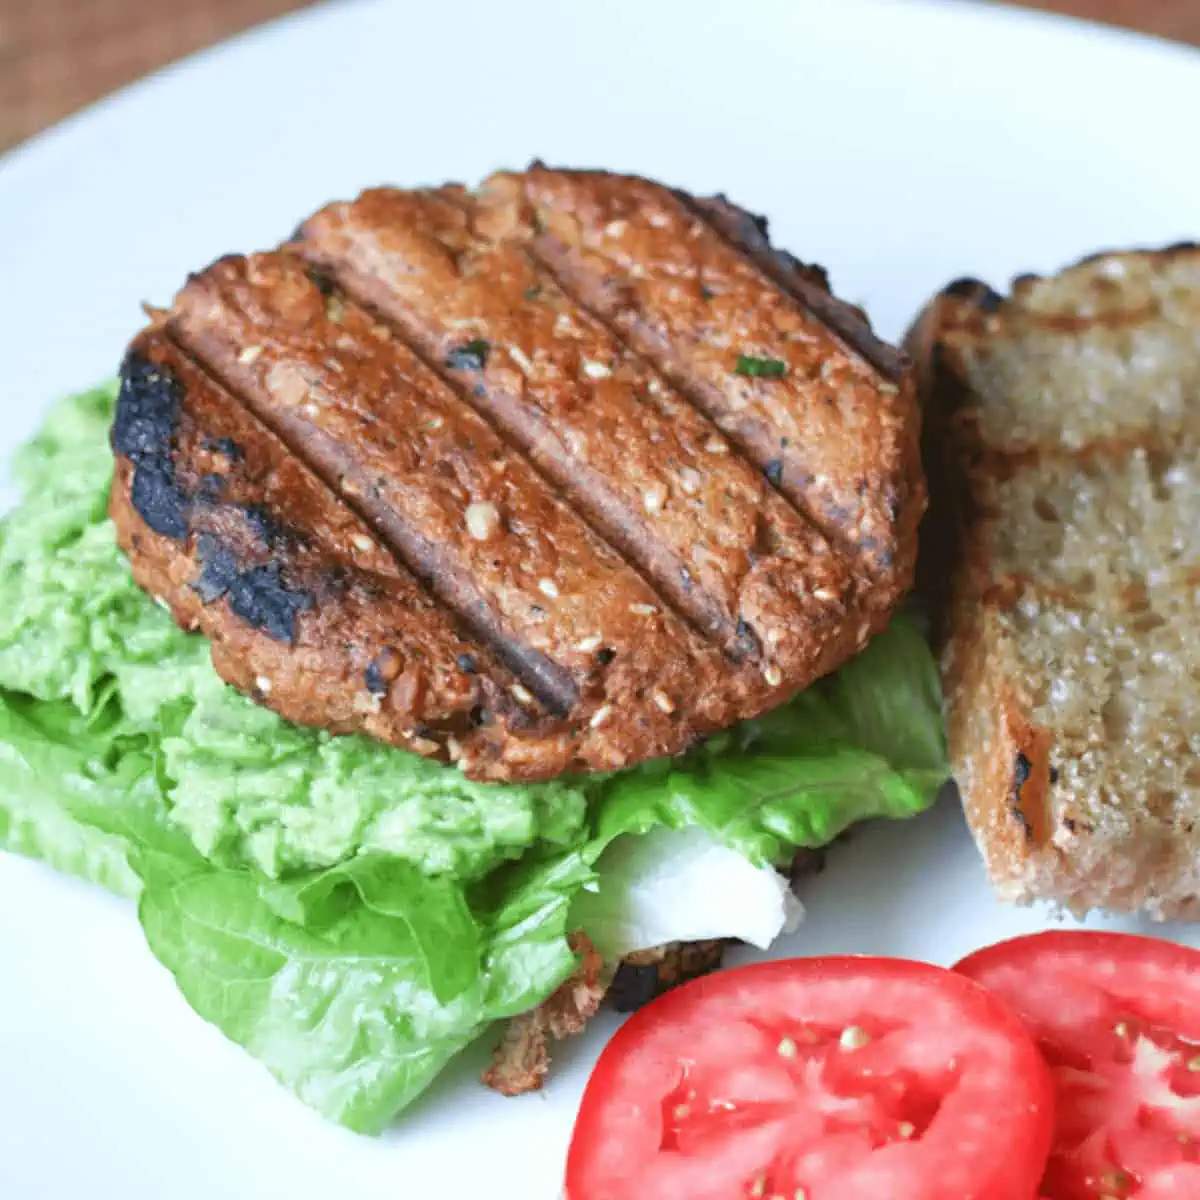 salmon burger on bread with lettuc, avocado and tomatoes